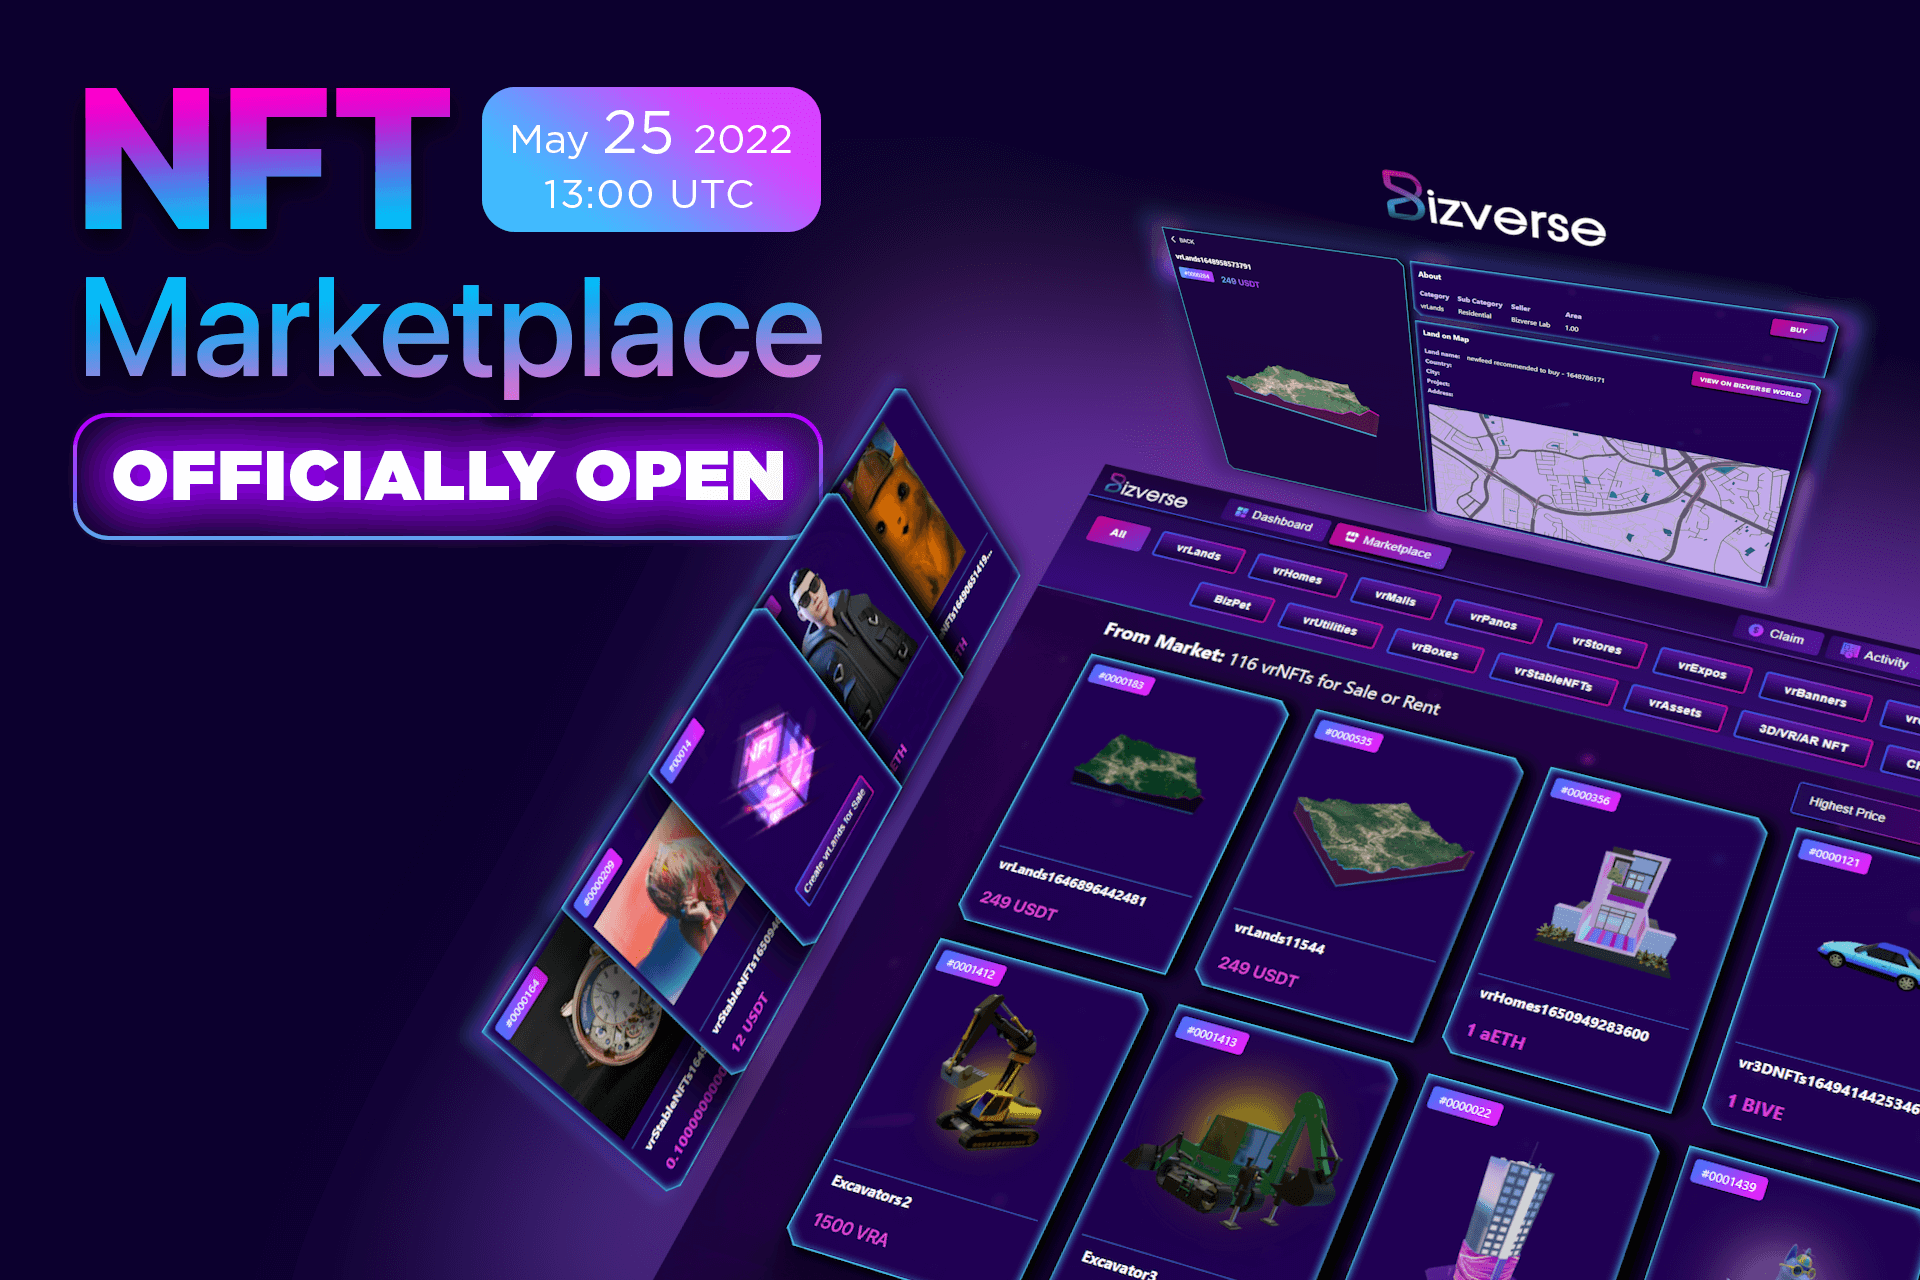 HOT NEWS: NFT MARKETPLACE OFFICIALLY LAUNCHED 